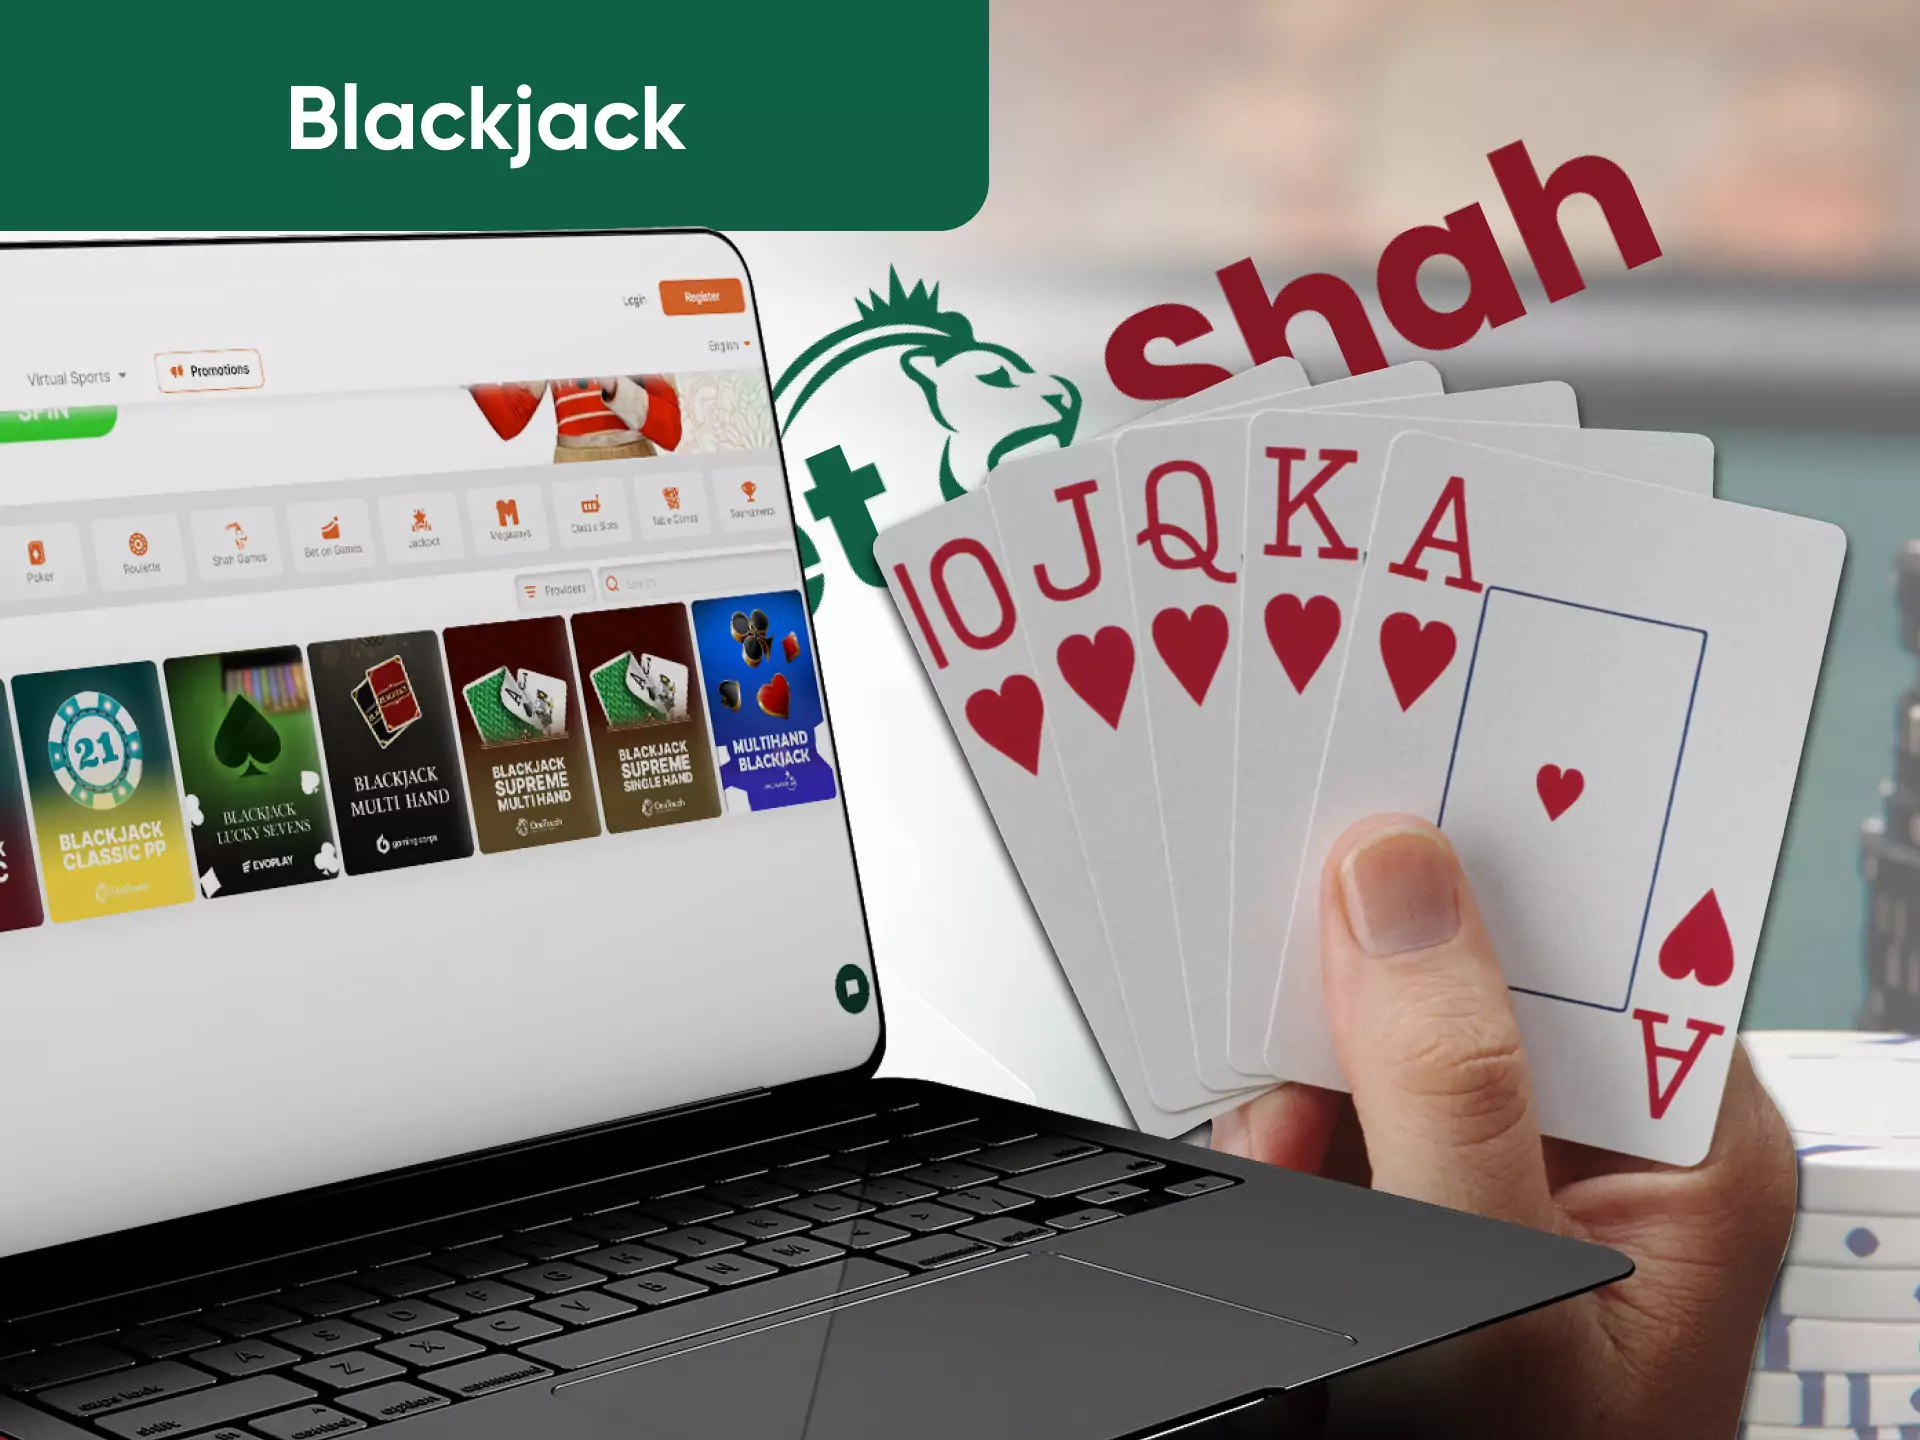 In the Betshah Casino, you can play blackjack.